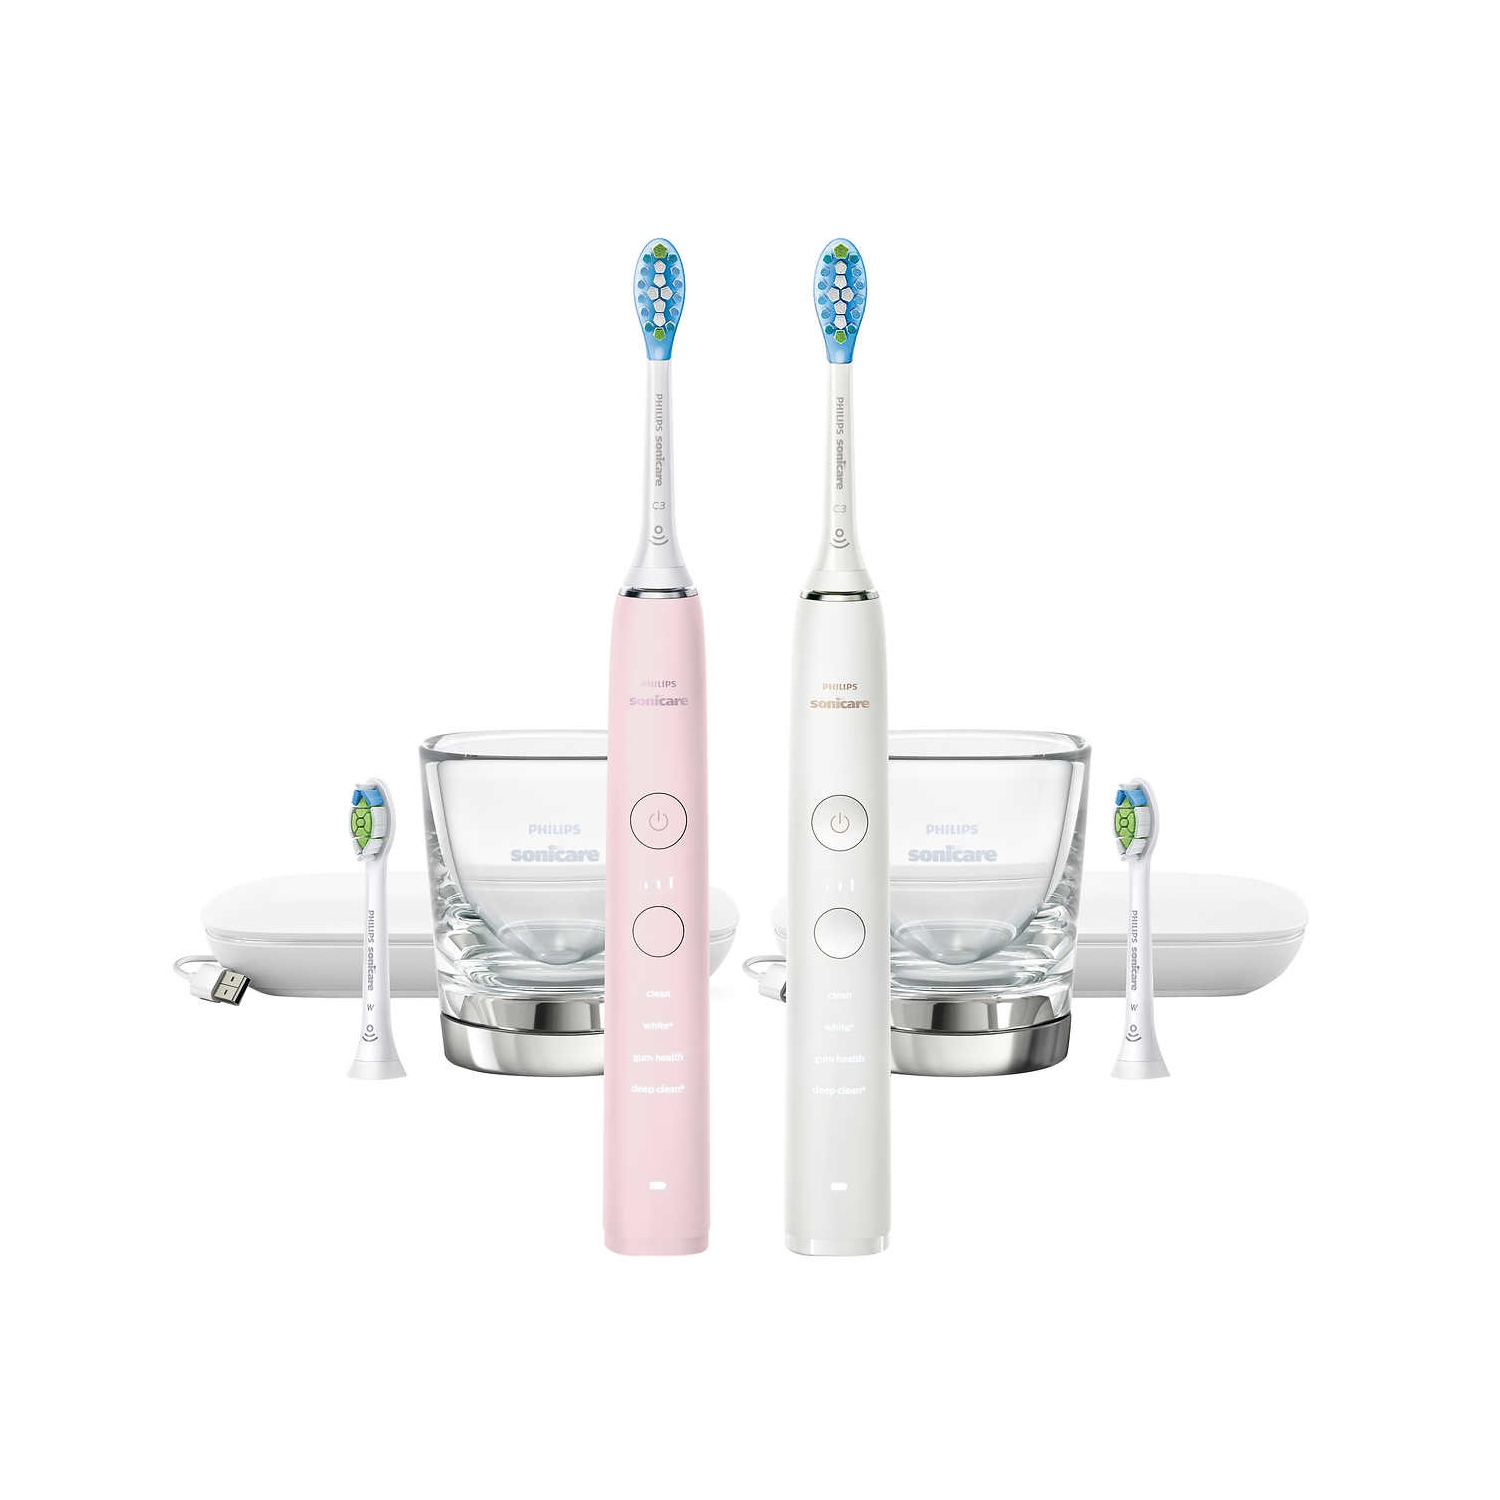 Philips Sonicare DiamondClean Connected Series Toothbrush, 2-pack